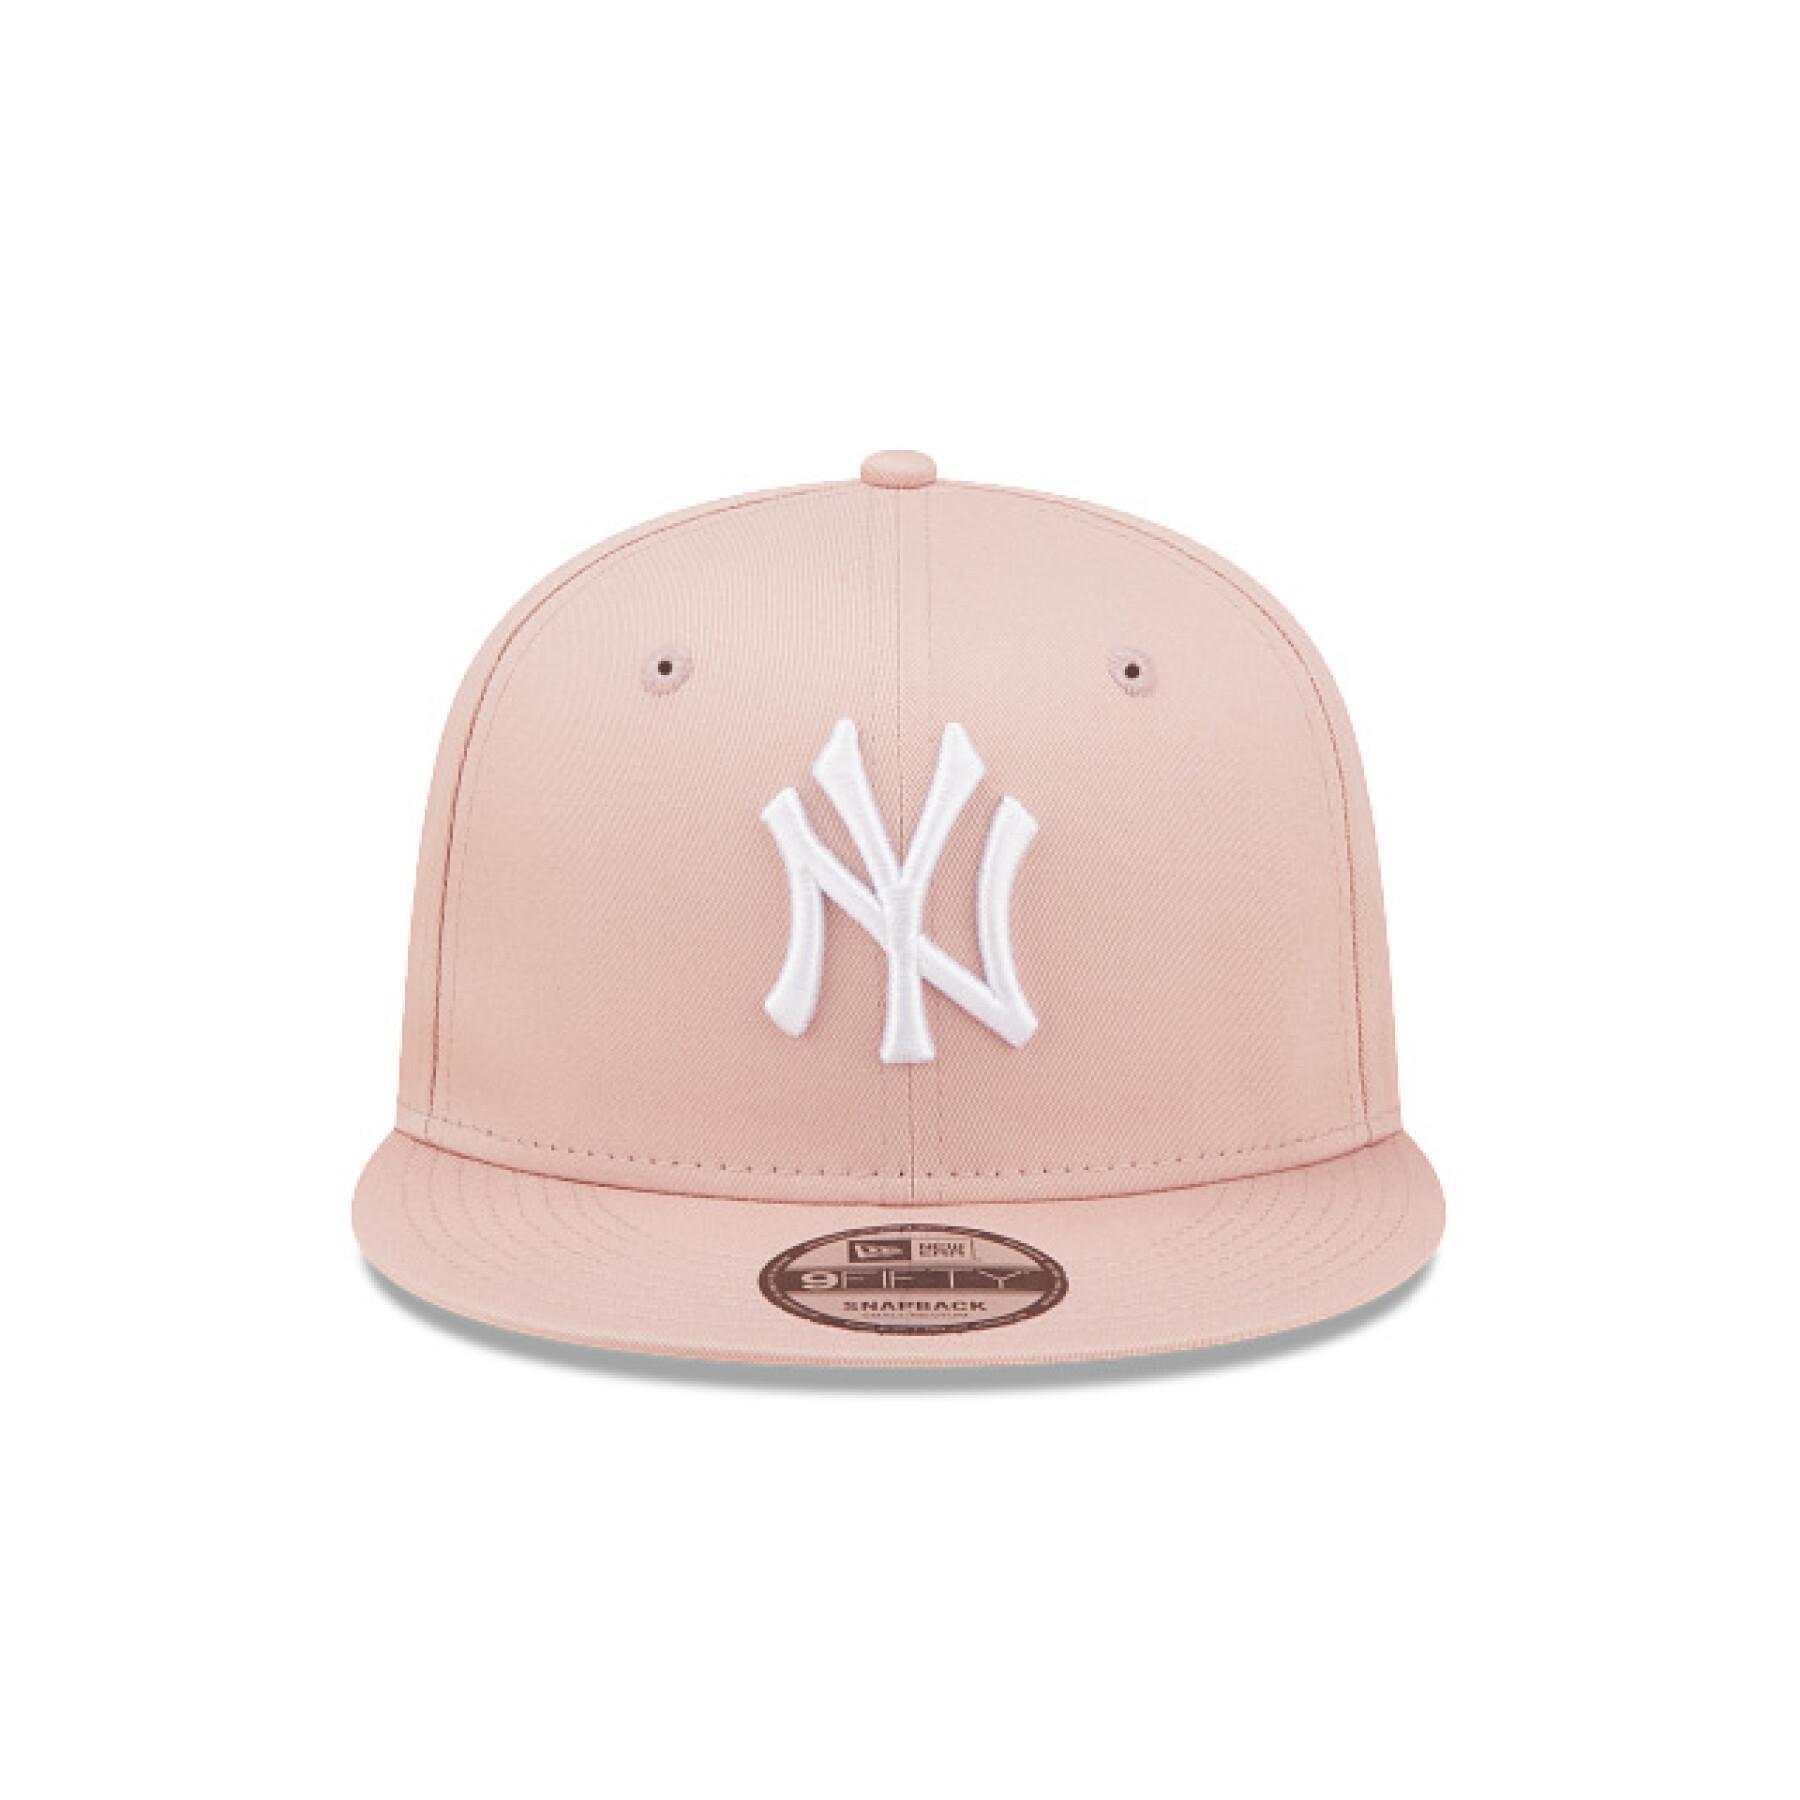 Casquette New York Yankees League Essential 9Fifty